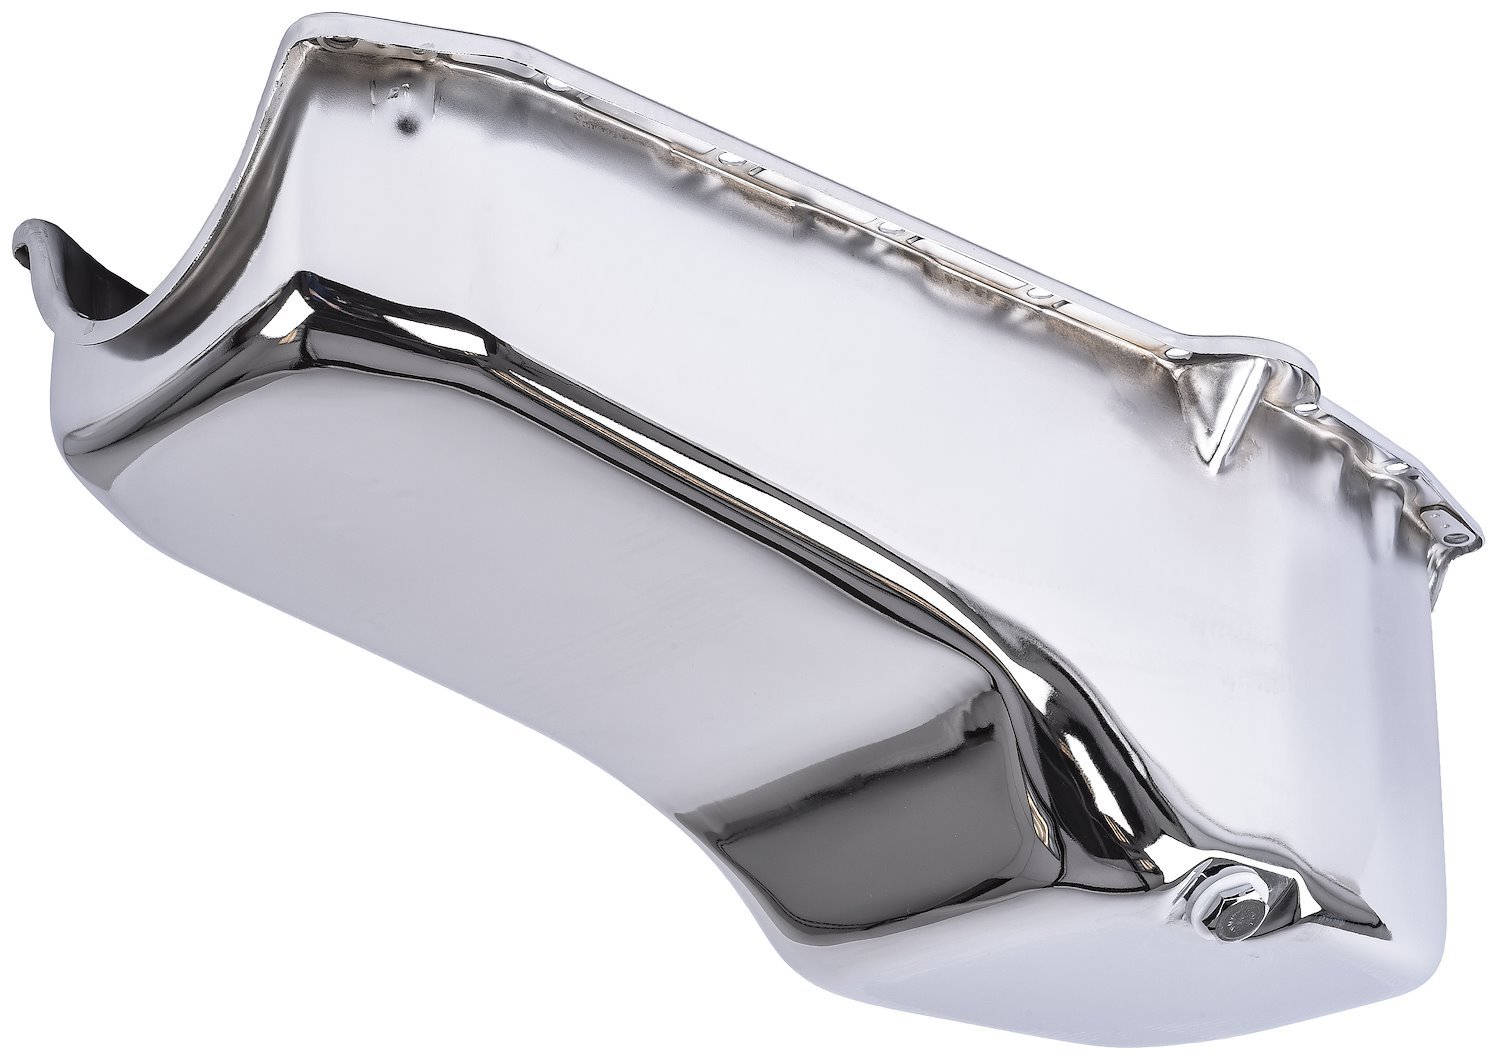 Stock-Style Replacement Oil Pan for 1955-1980 Small Block